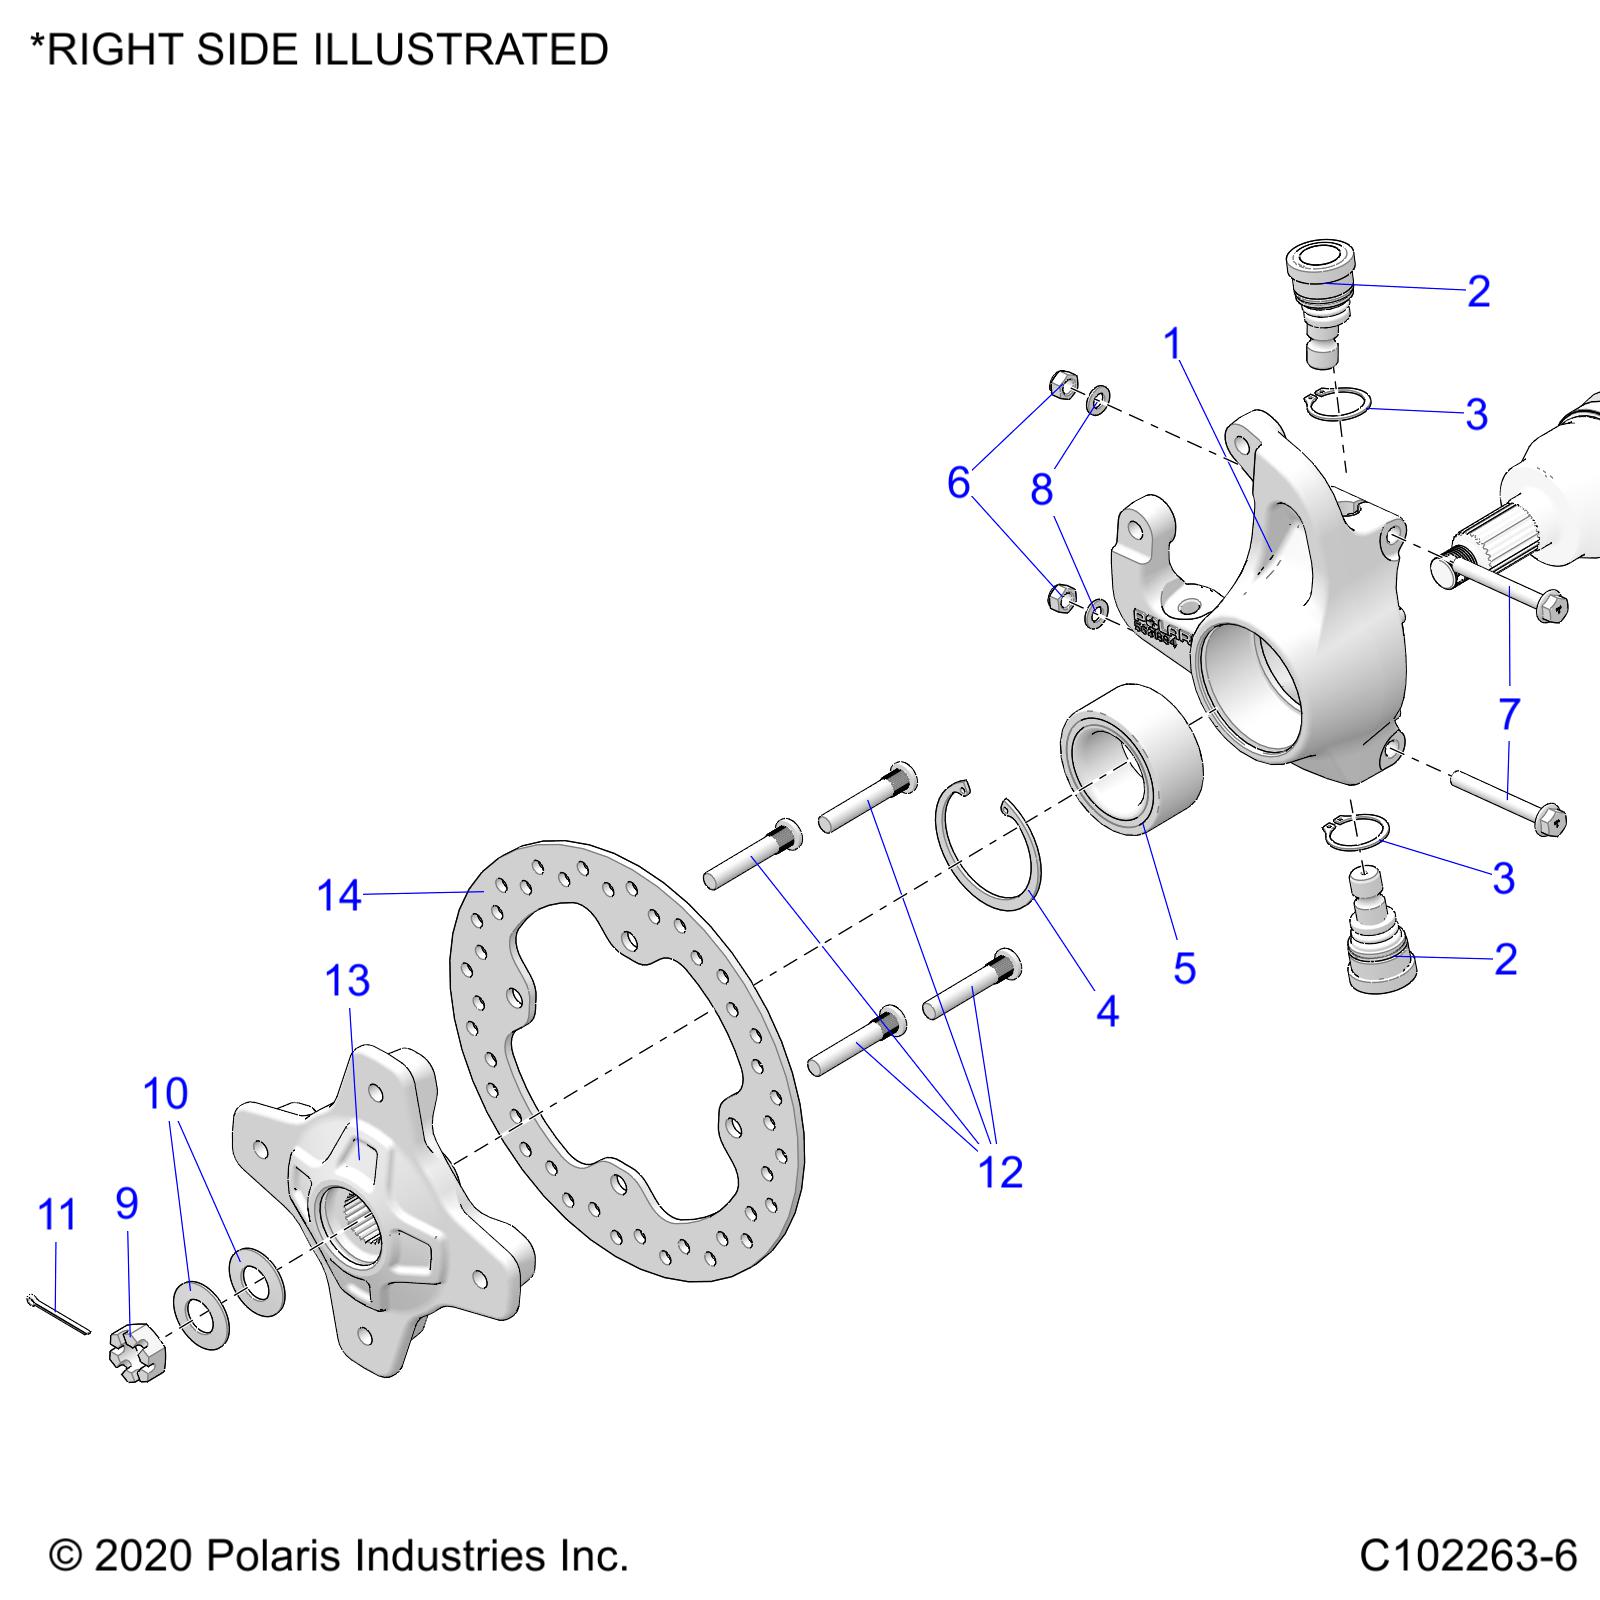 Part Number : 7061220 LOWER ARM BALL JOINT